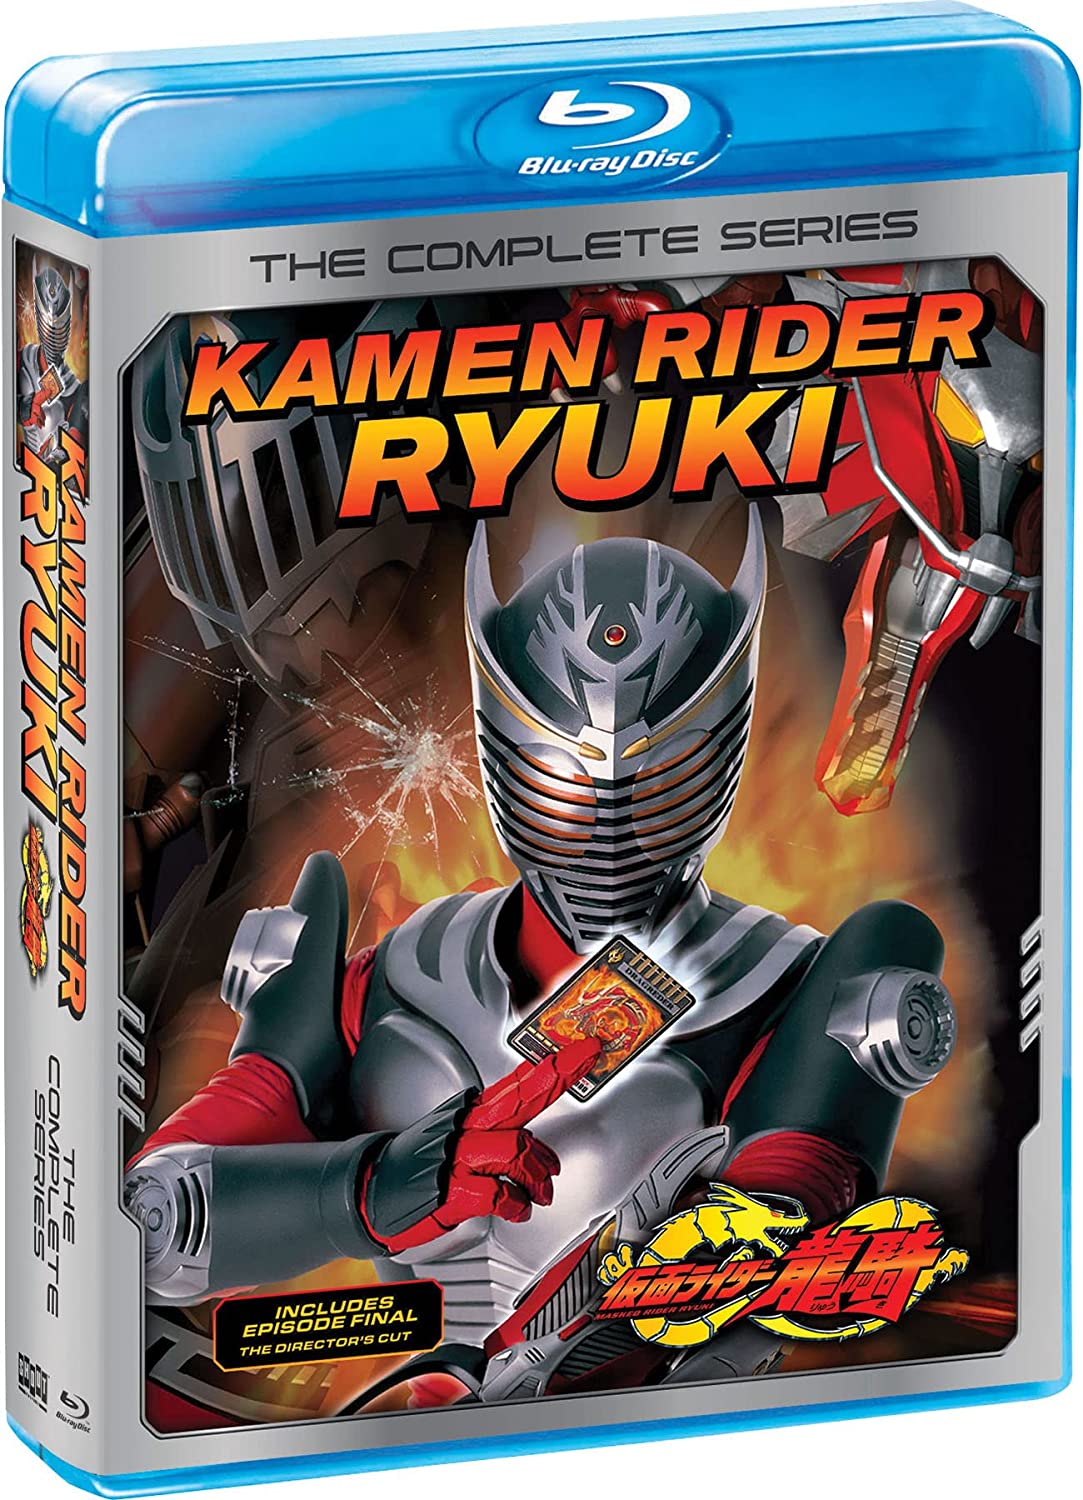 A promotional photo featuring an isometric view of the Blu-Ray case for Shout! Factory's upcoming release of Kamen Rider Ryuki: The Complete Series.